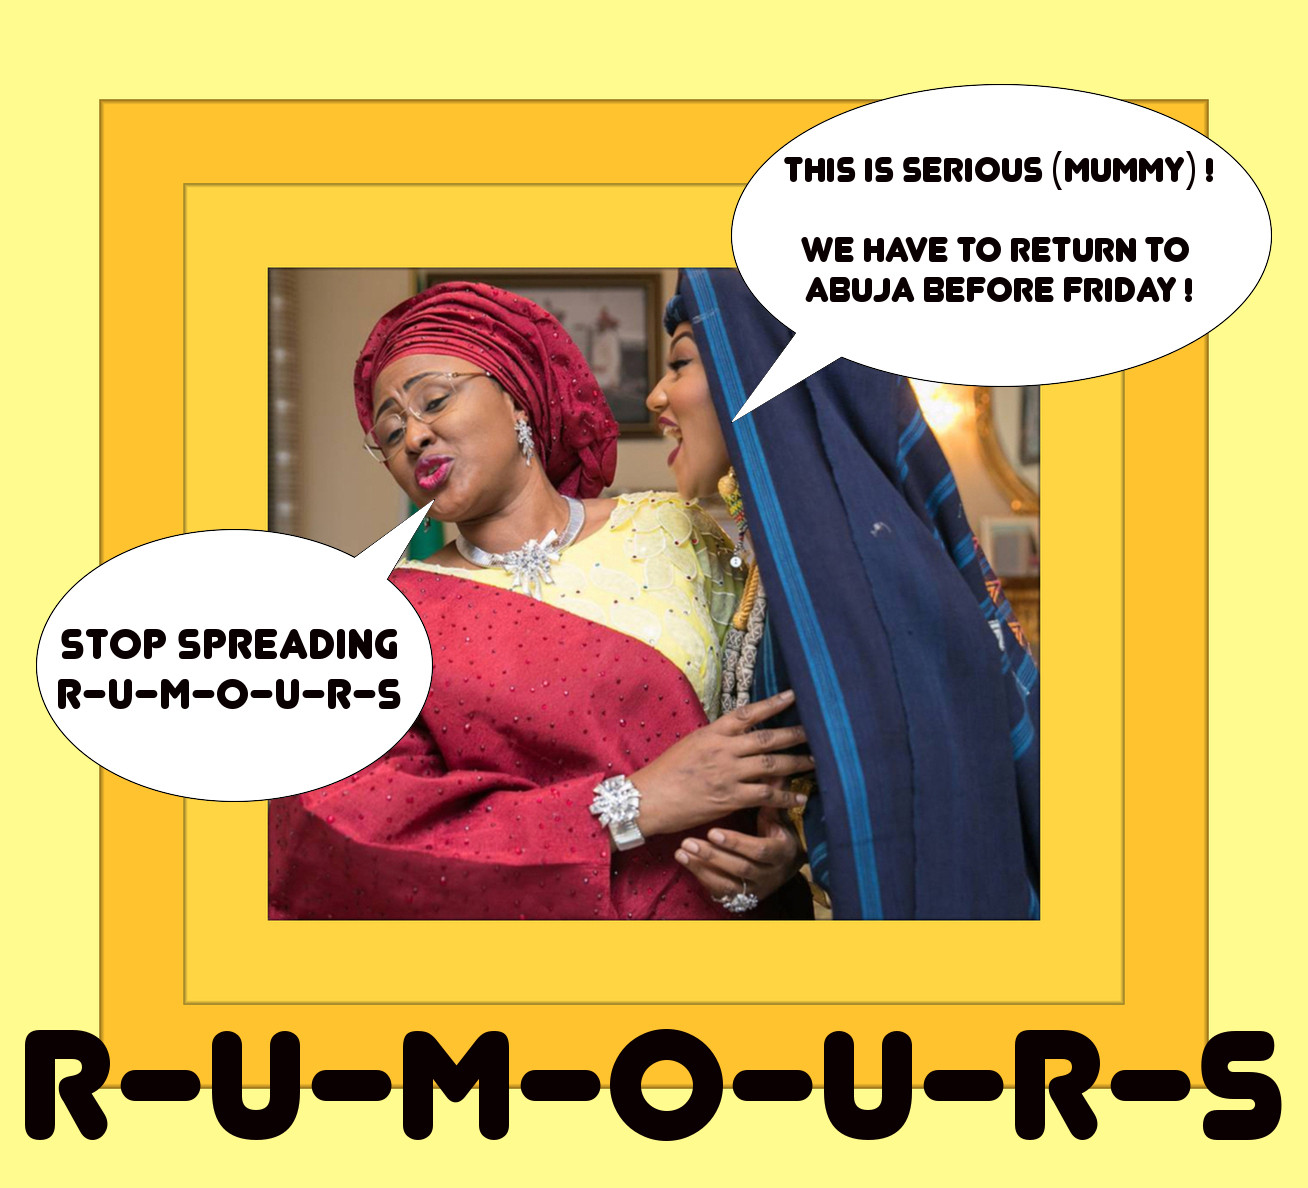 Aisha Buhari The Other Room Soap Opera Top Best Online One Number 1 #1 Nigeria Top Wedding Nigeria Top Blog Blogs Blogger Bloggers Website Websites Celebrity News #1 Rumour Rumours Gossip Gist Gists Amebo Celebrities Film Music Event Events Actor Actors Musician Musicians Fashion Business Jobs Sports Health Care Healthcare Advice Travel